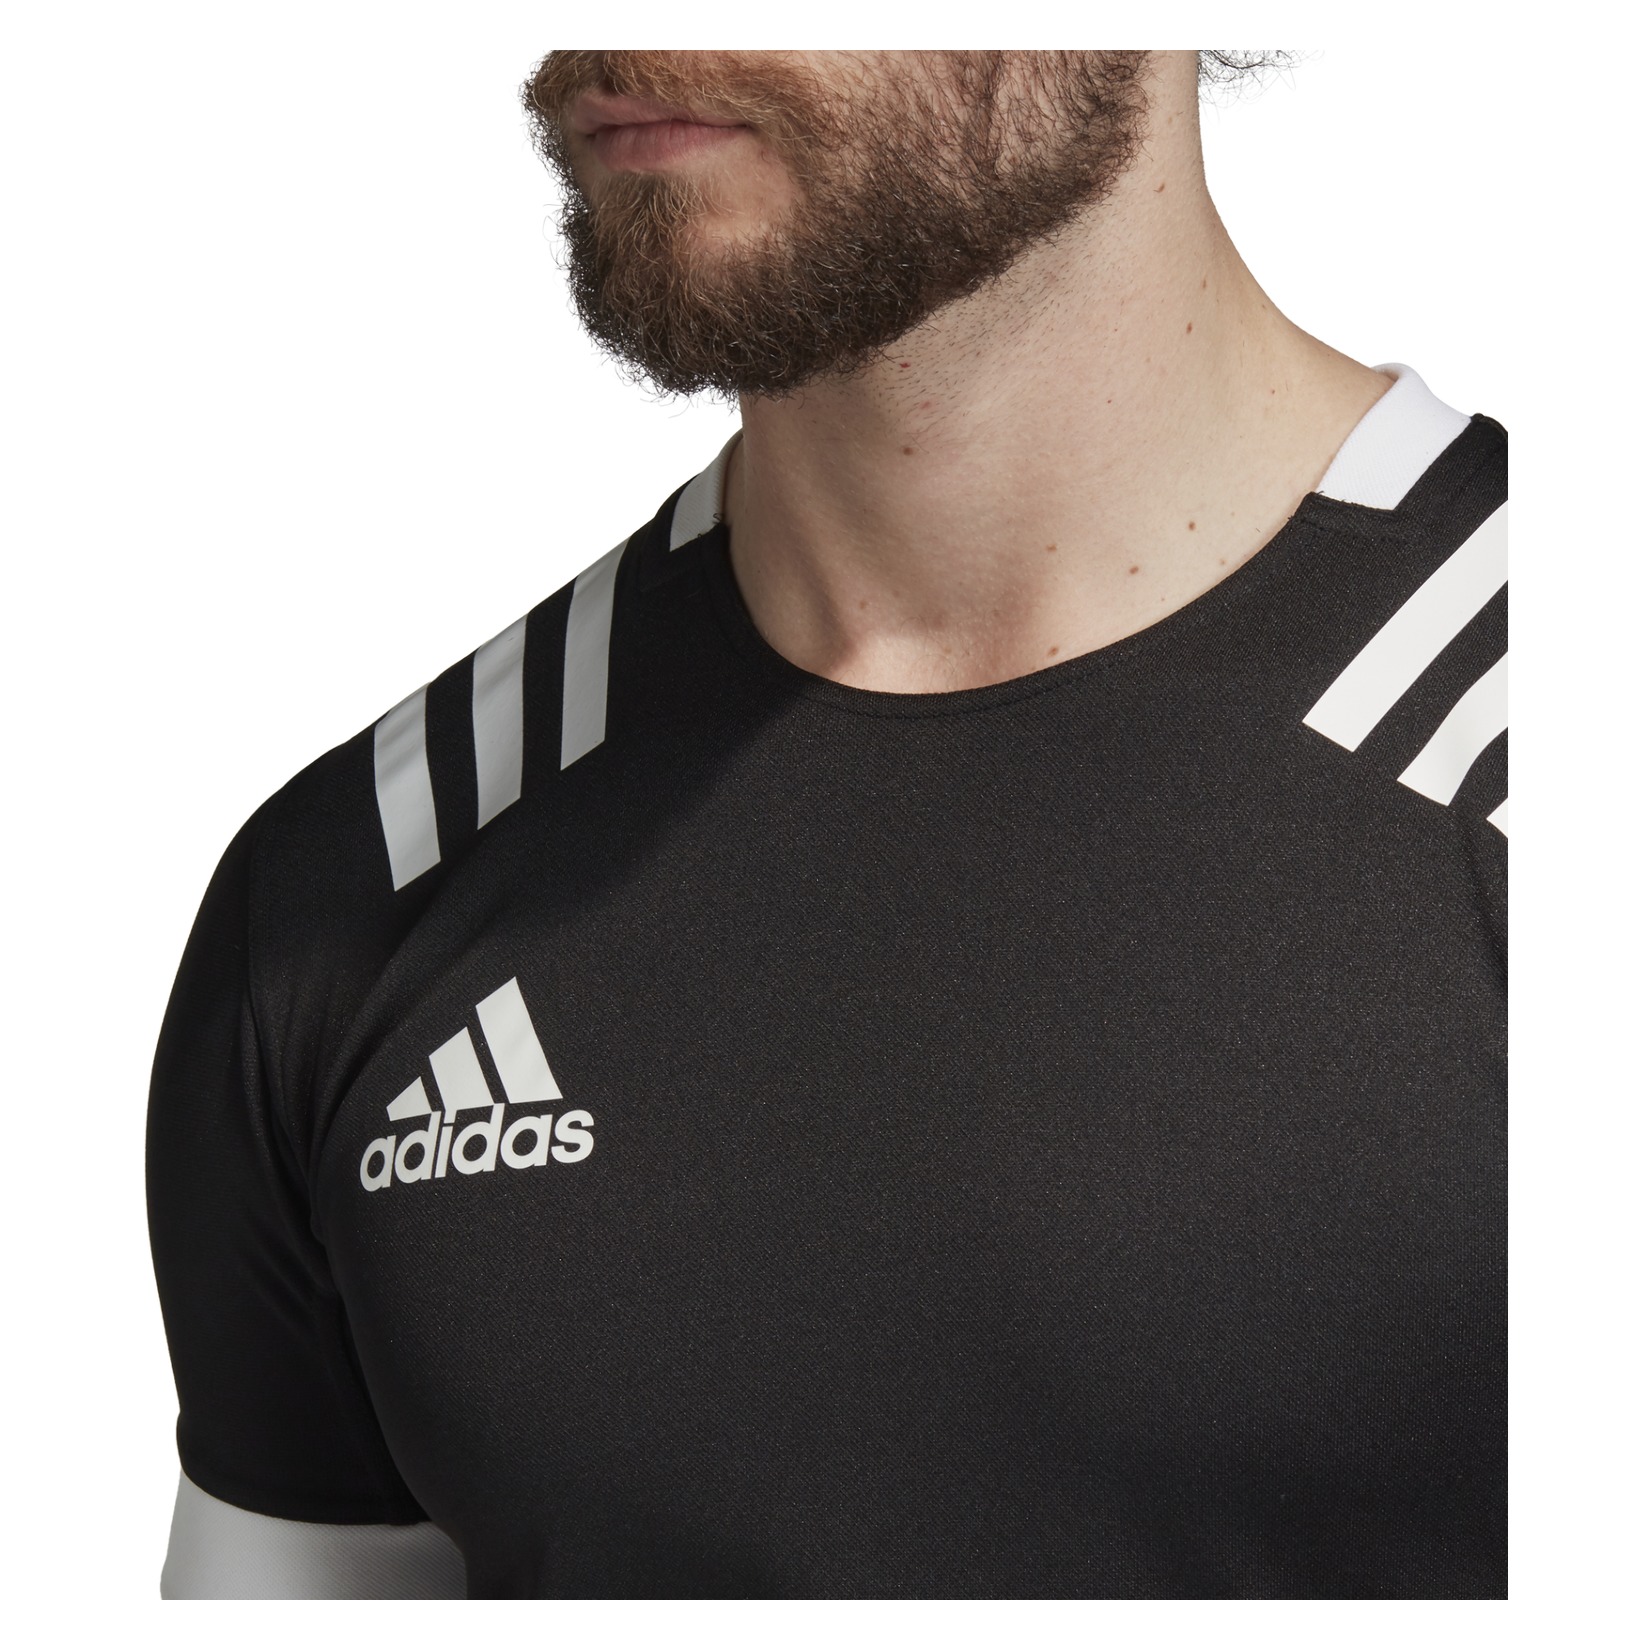 adidas-LP 3 Stripes Fitted Rugby Jersey